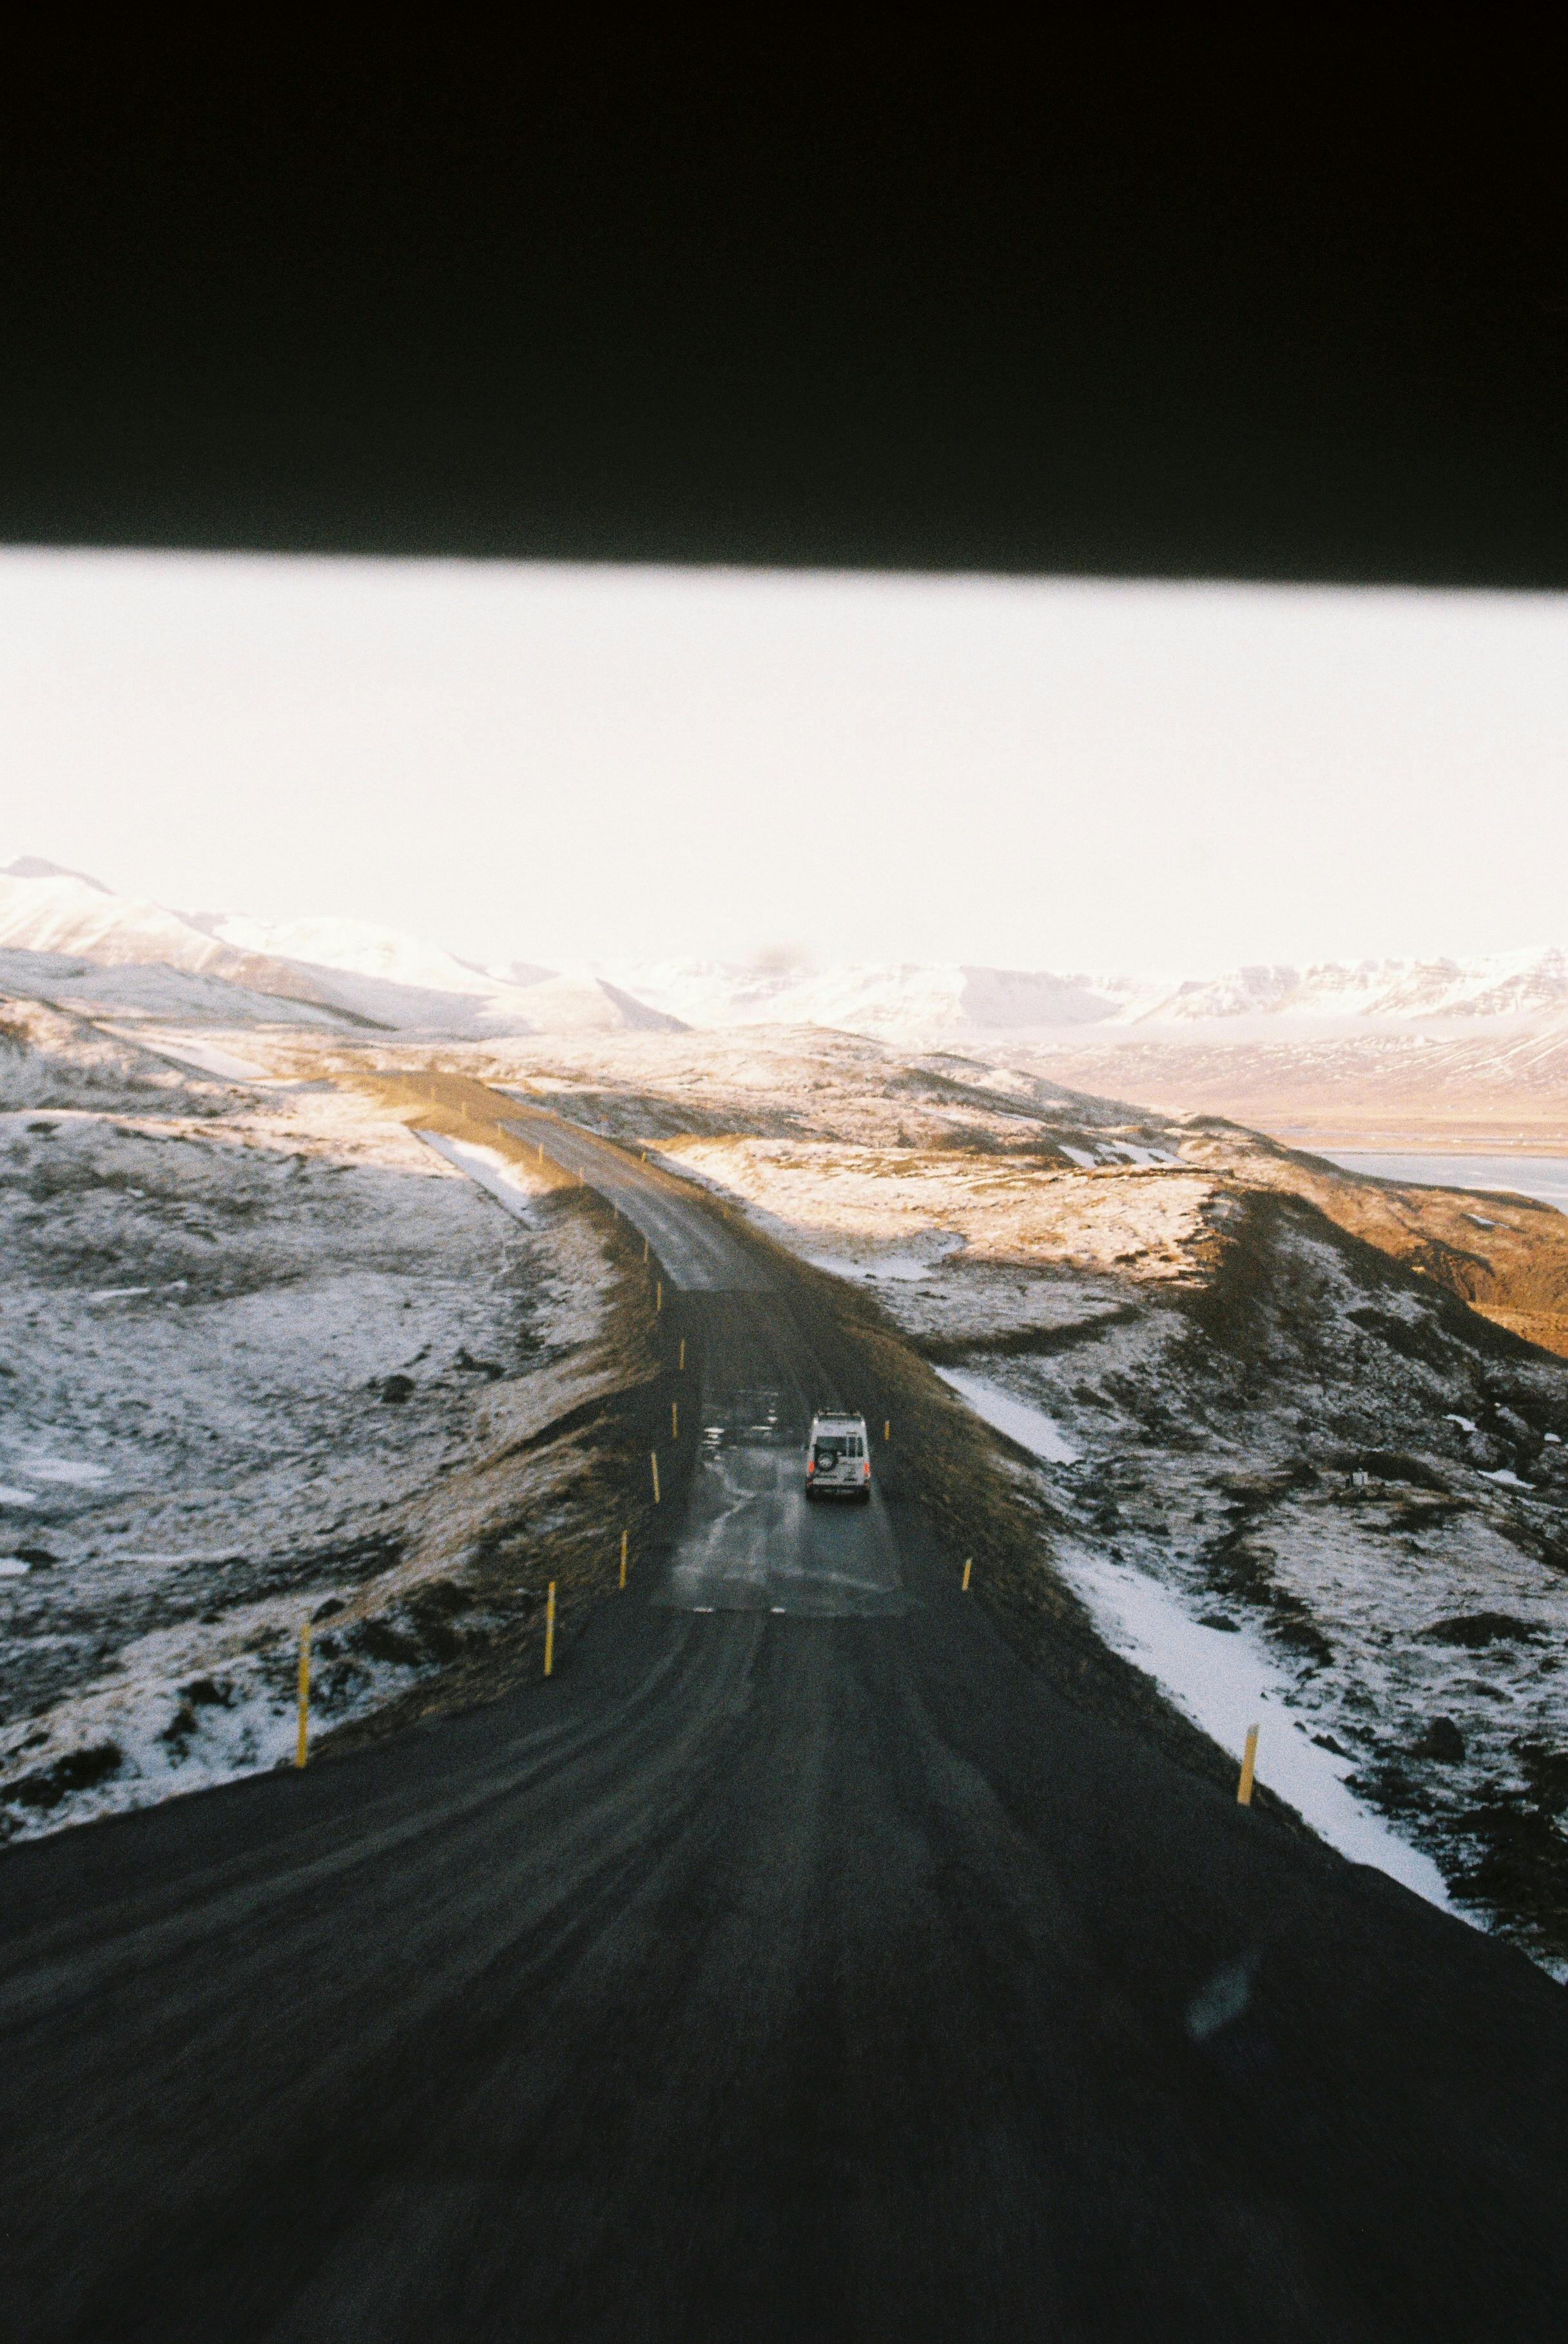 Photo taken from inside a van in iceland to other vans and snow and mountains